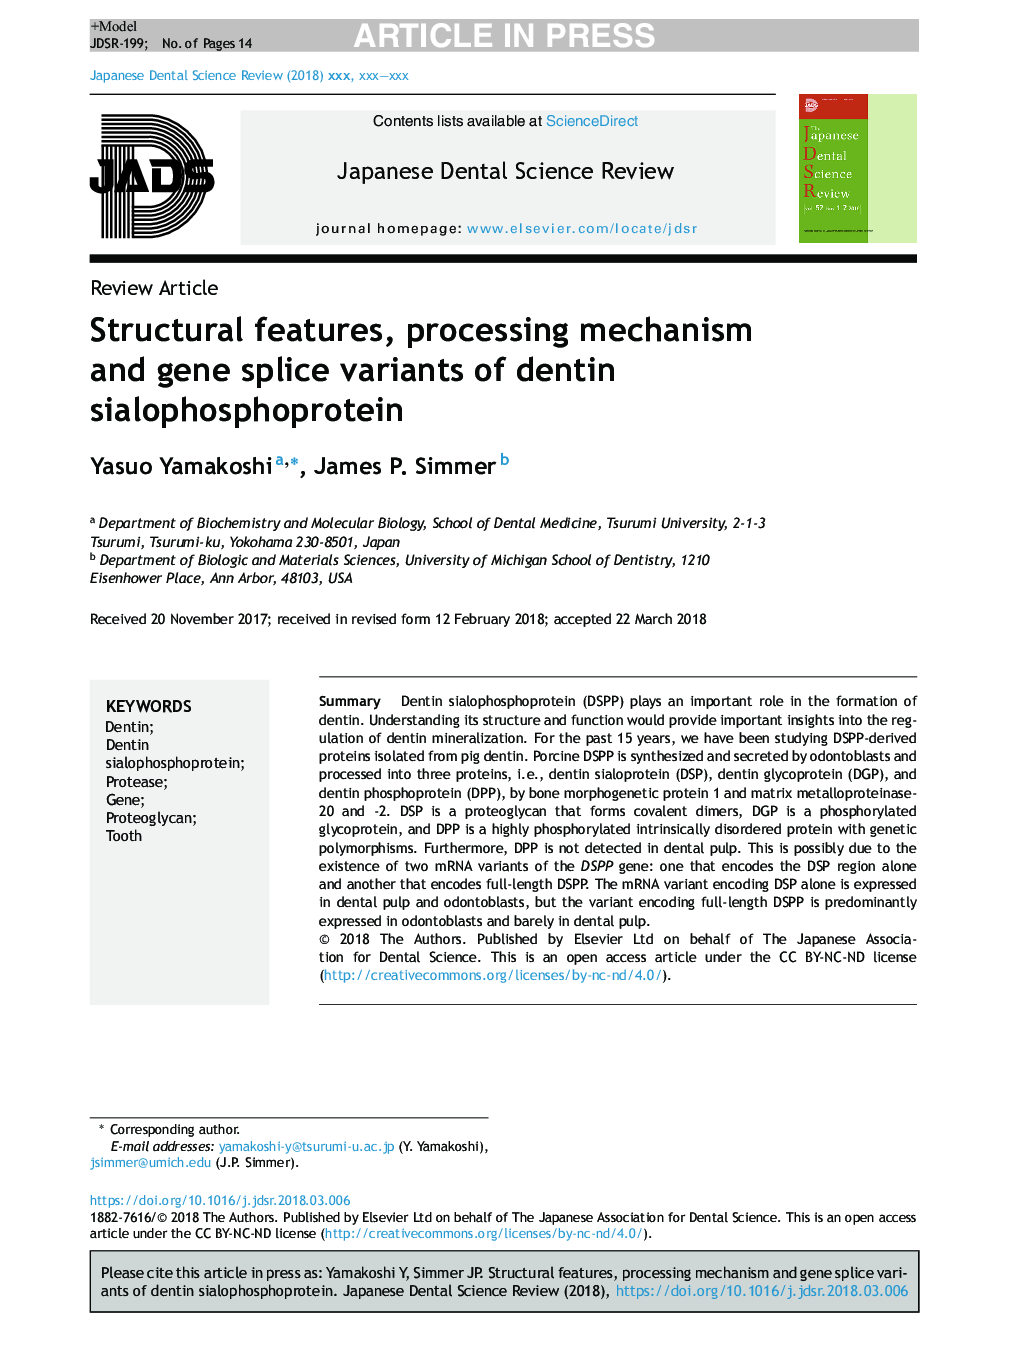 Structural features, processing mechanism and gene splice variants of dentin sialophosphoprotein